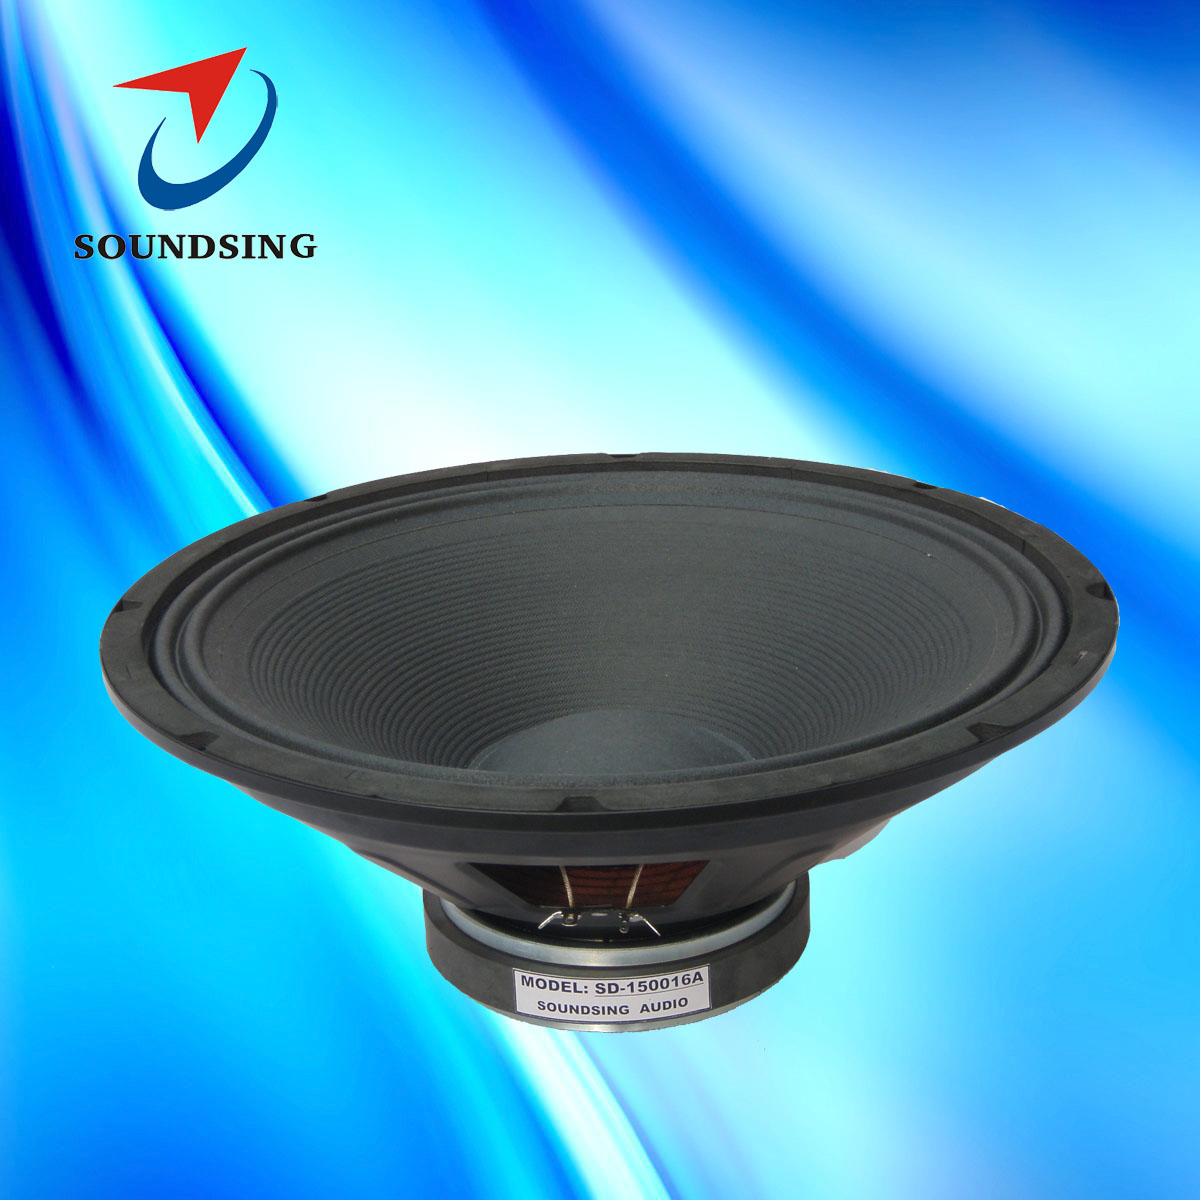 SD-150016A 15inch pro audio speakers